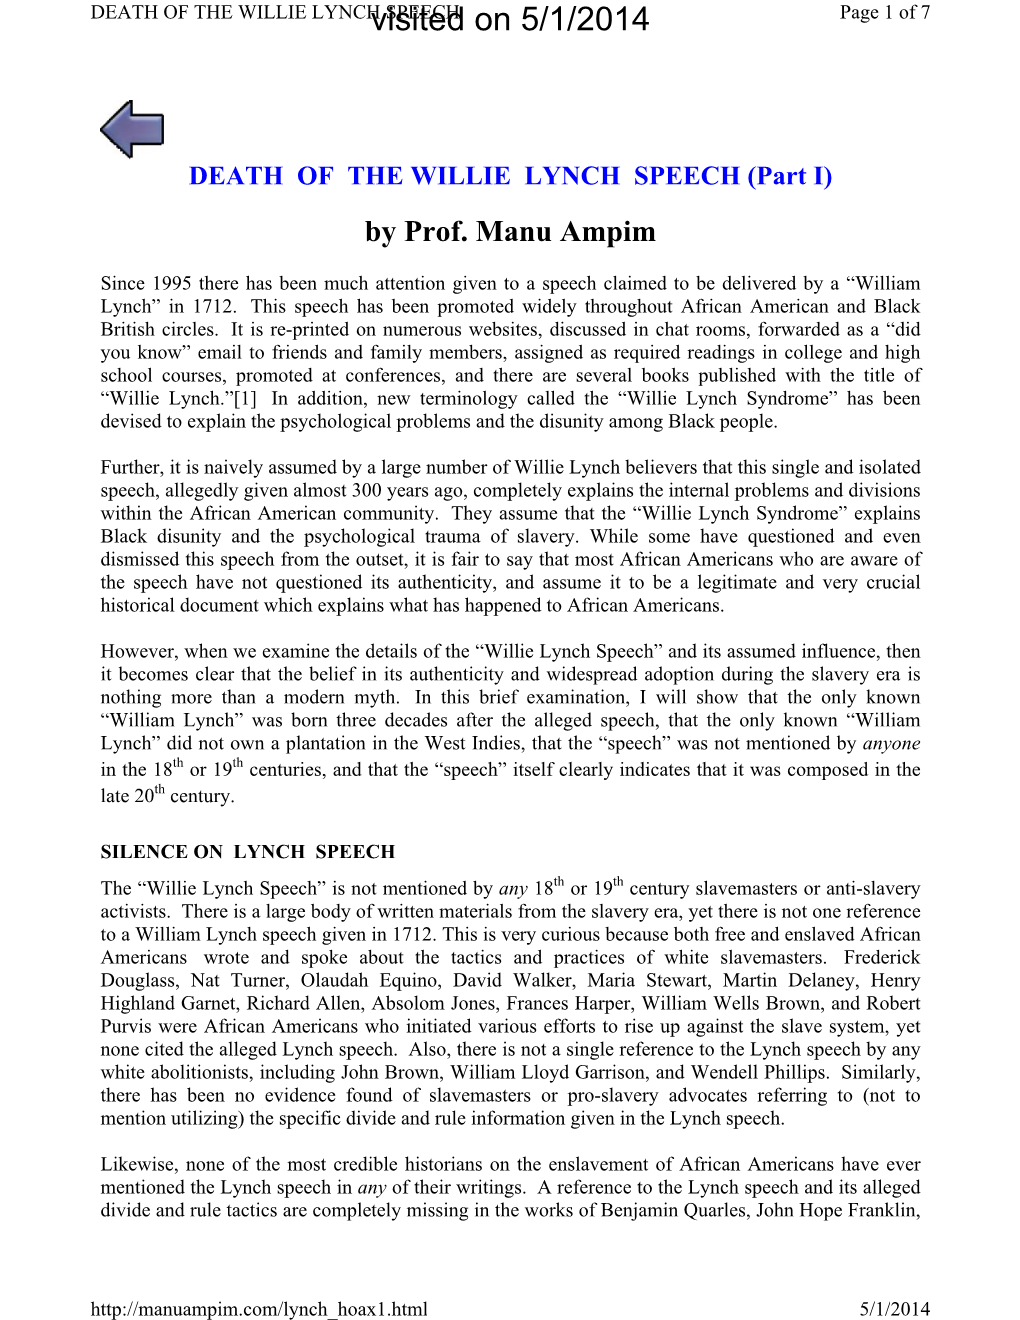 DEATH of the WILLIE LYNCH SPEECH (Part I) by Prof